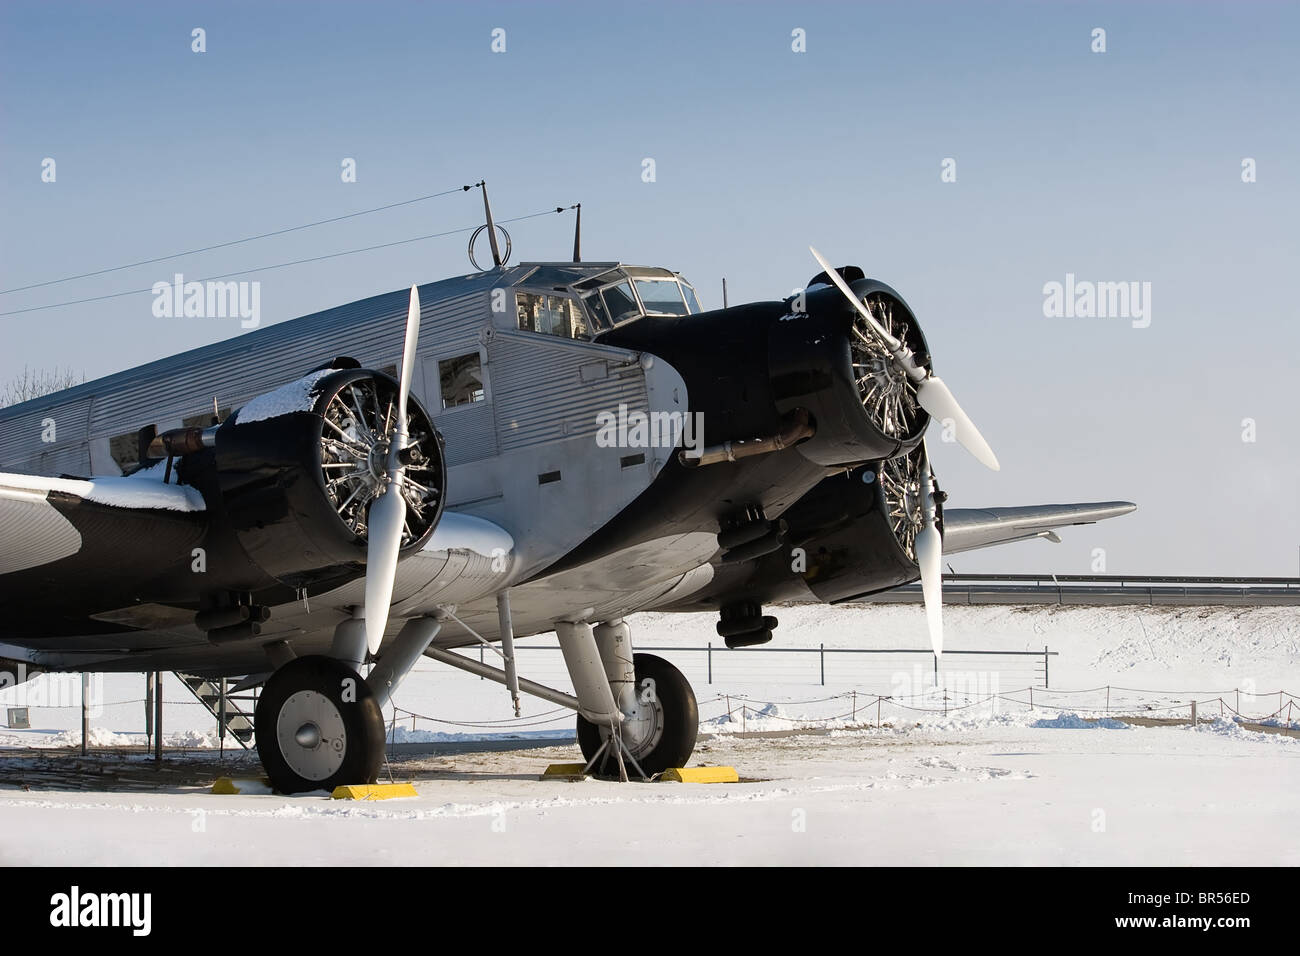 The Junkers Ju 52 was used as an civilian airliner and military aircraft manufactured between 1932 and 1945 by Junkers. Stock Photo